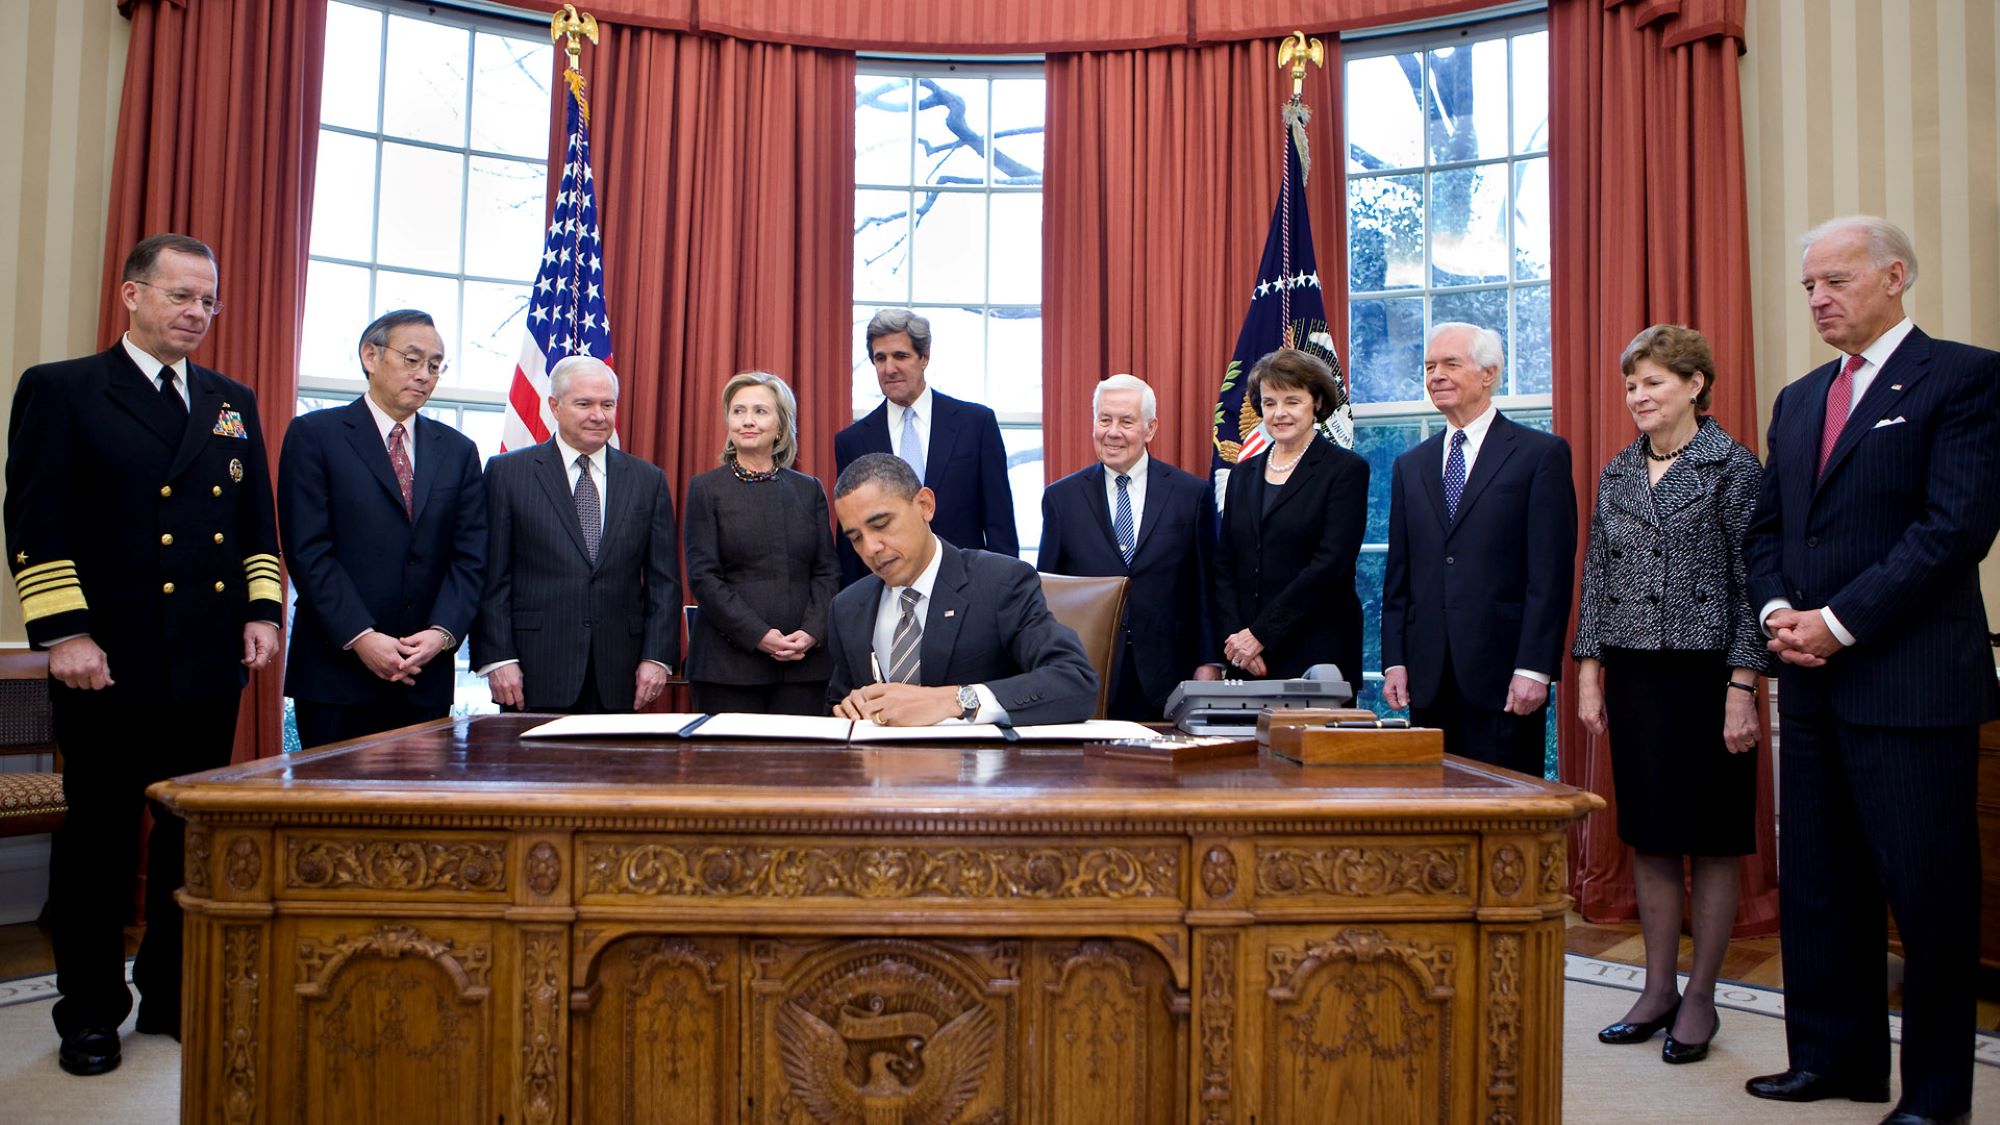 President Obama signing the New START Treaty in the Oval Office, February 2, 2011